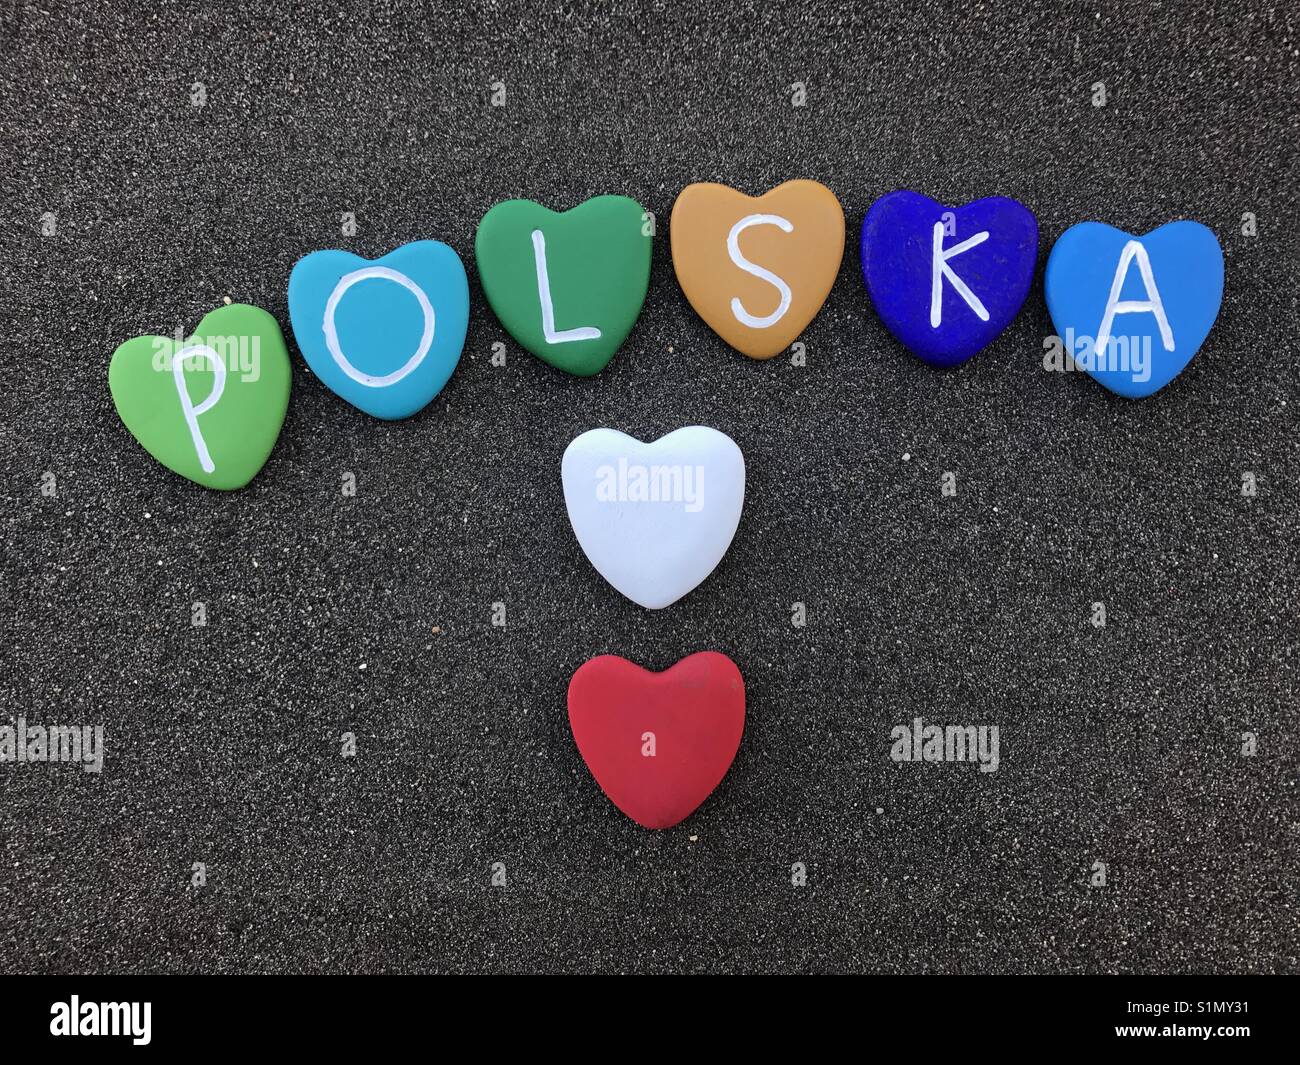 Polska country name with colored heart stones over black volcanic sand Stock Photo